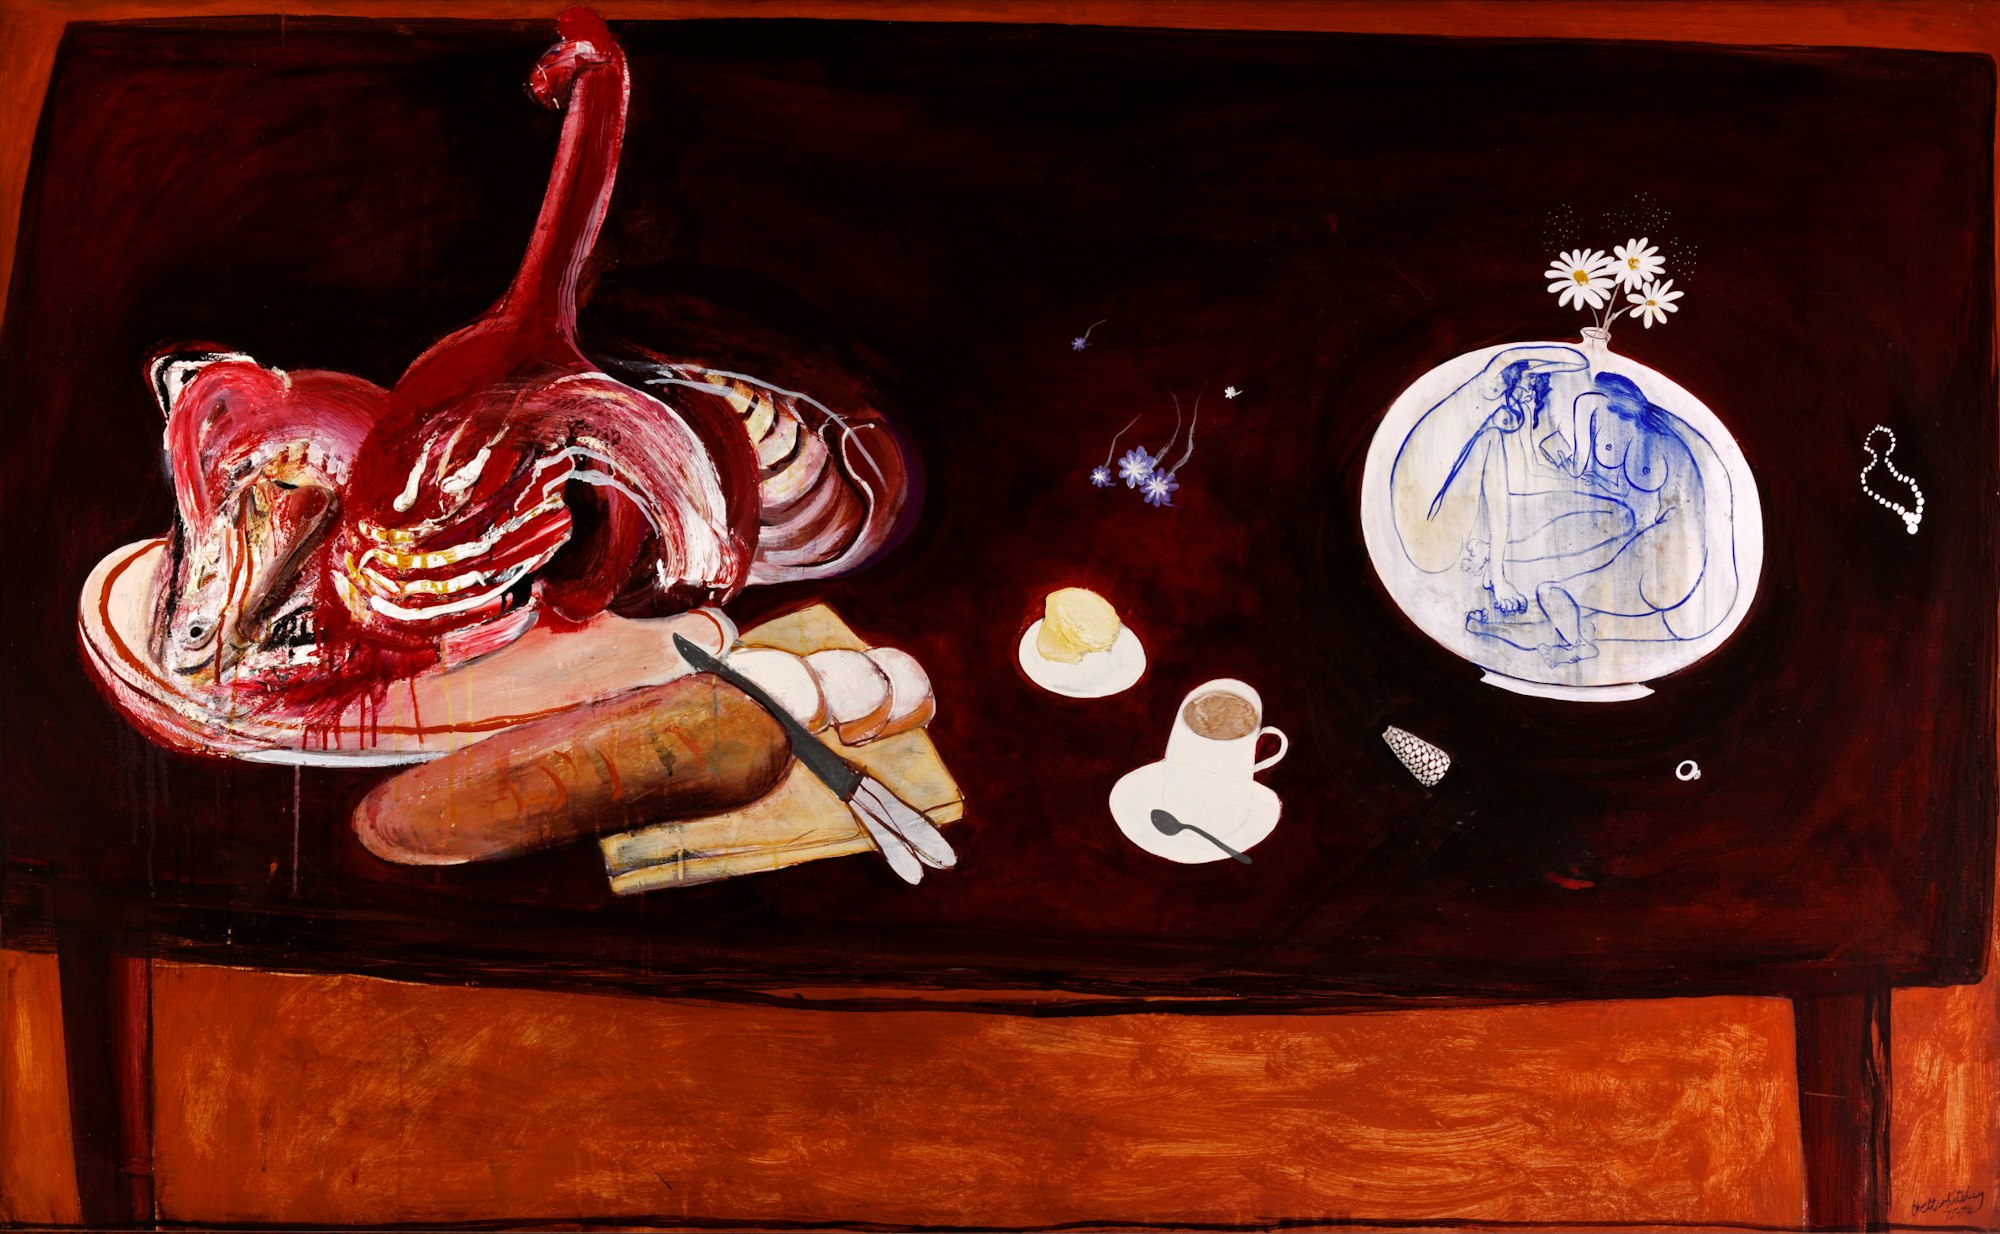 A table with a blue and white round vase holding daisies as well as a cup and saucer, a small plate, a loaf of bread and knife on a board and a platter of meat.